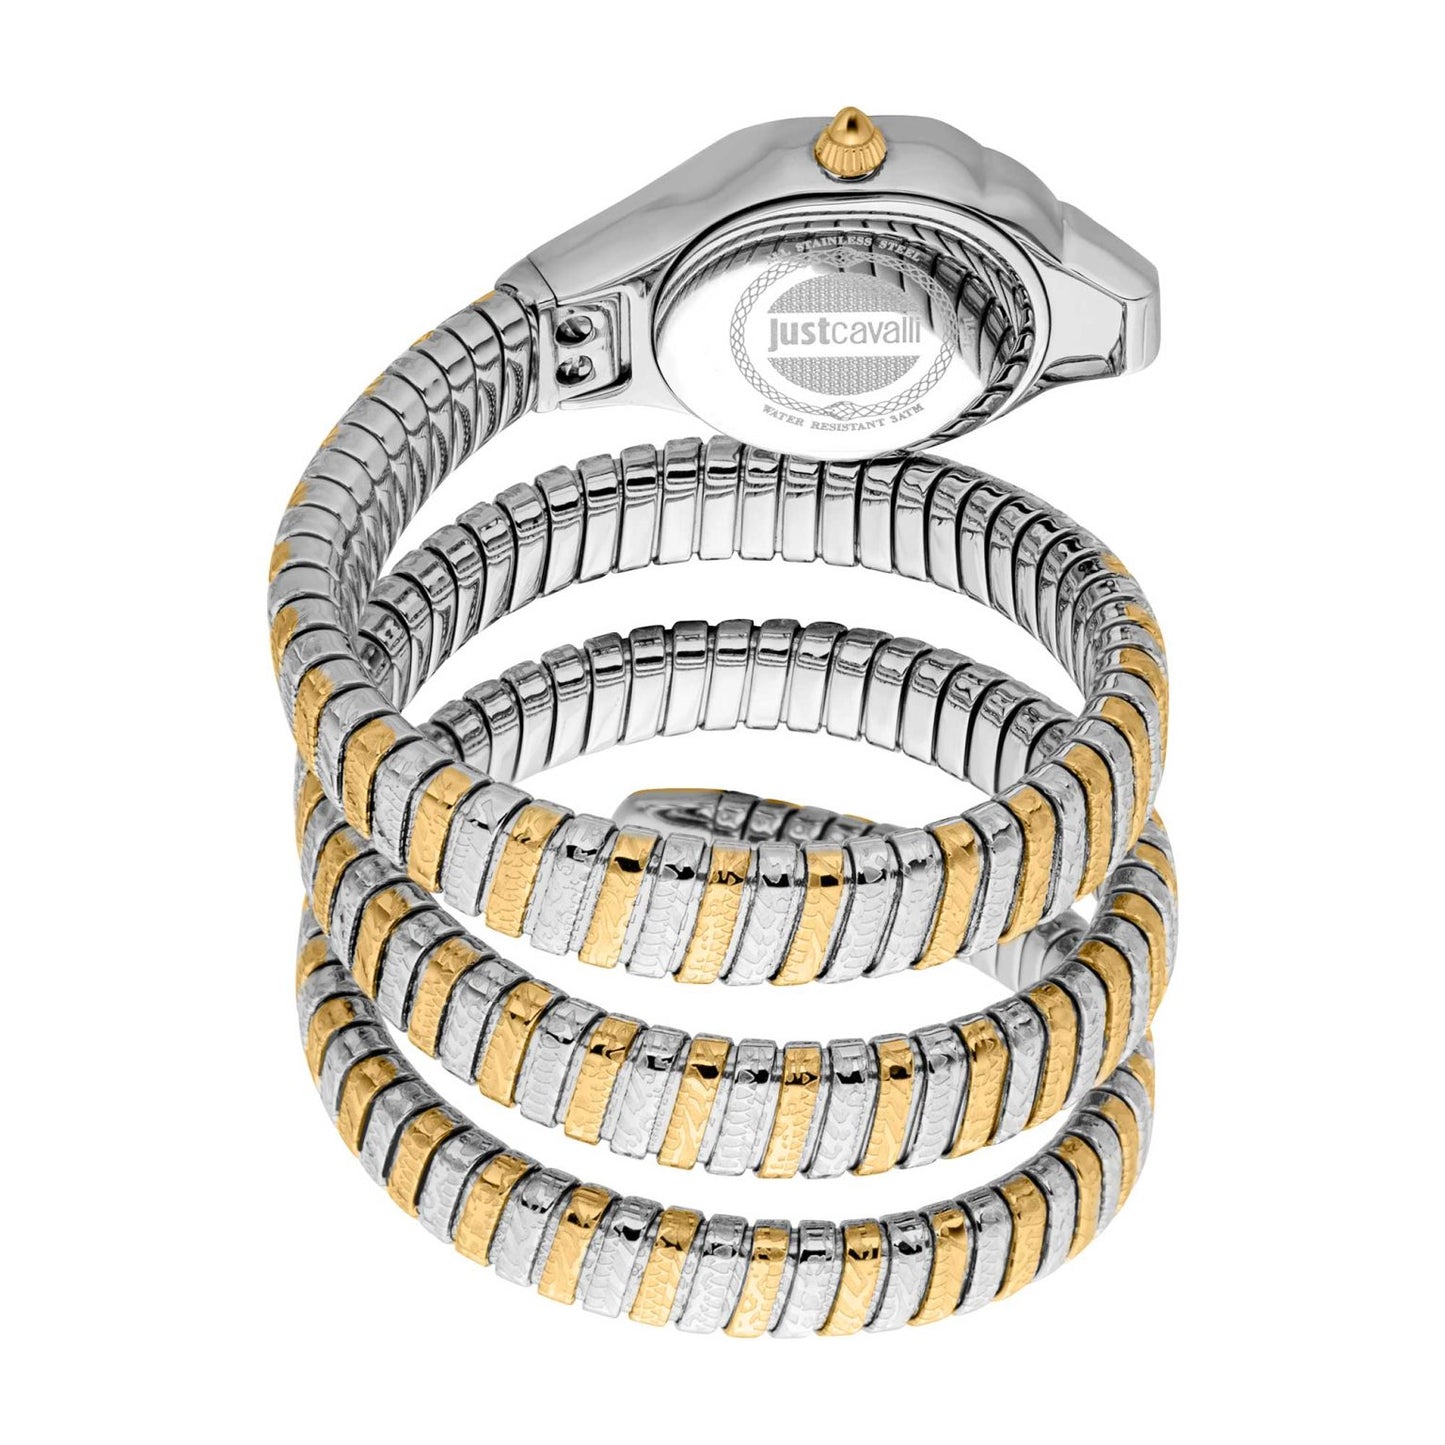 Just Cavalli Analog Quartz Snake Watch with Stainless Steel Strap